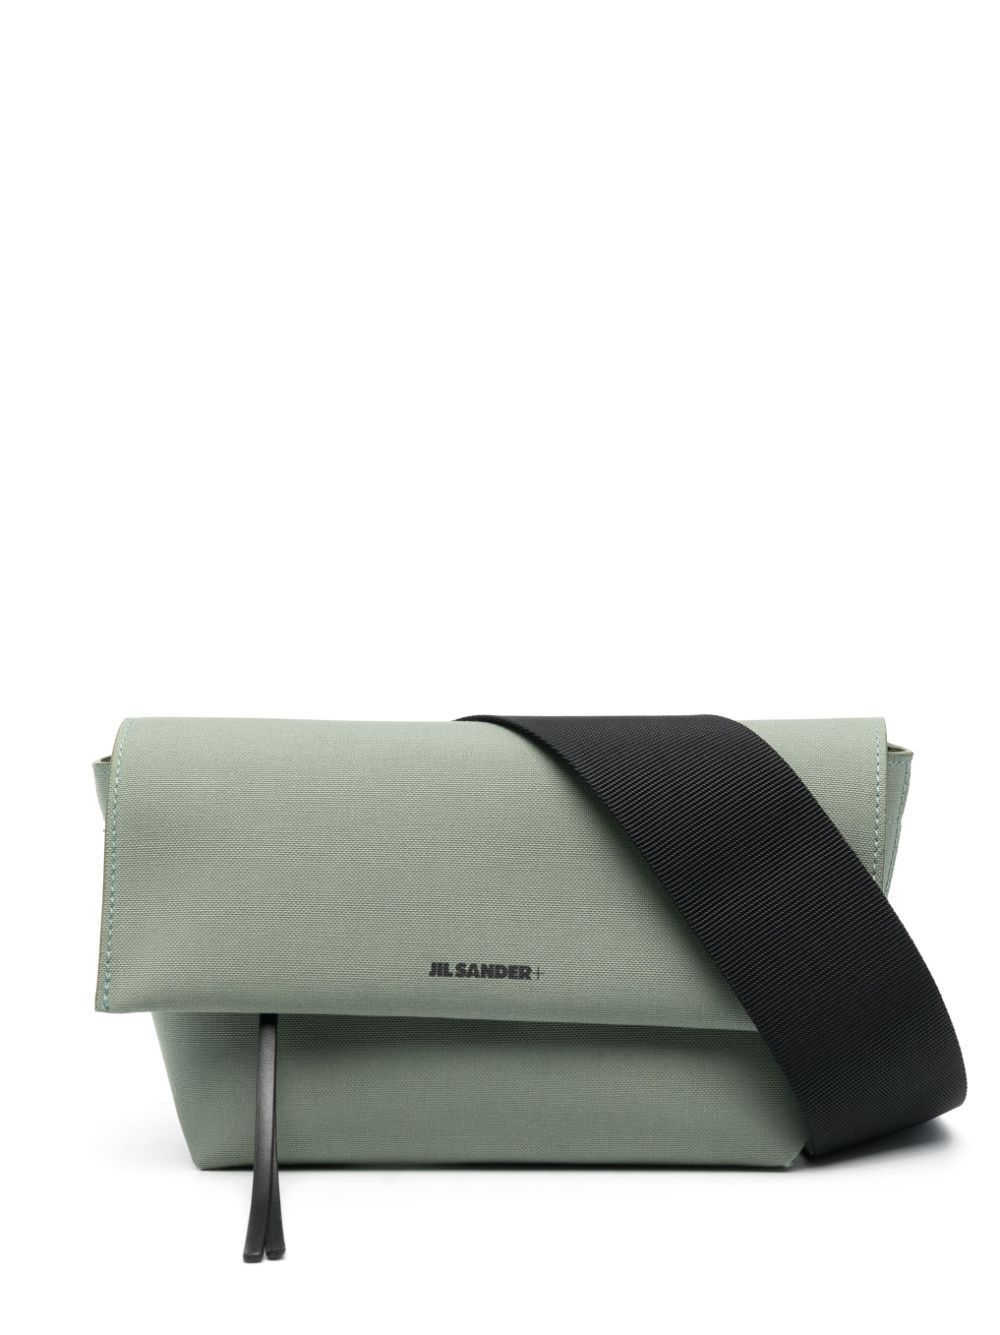 <p><strong>$1030.00</strong></p><p>Jil Sander's utilitarian take on the belt bag is clean, minimalist, and classic. Made from a canvas-like fabric, the folded shape can be worn for a casual day of errands with activewear and sneakers or to work with a tailored skirt and loafers. </p><p><strong>Size:</strong> 4.3" H x 9 "W x 2.76" D. Total length: 55". </p><p><strong>Material: </strong>100% Fabric </p><p><strong>Colors: </strong>Sage Green and Yellow </p>